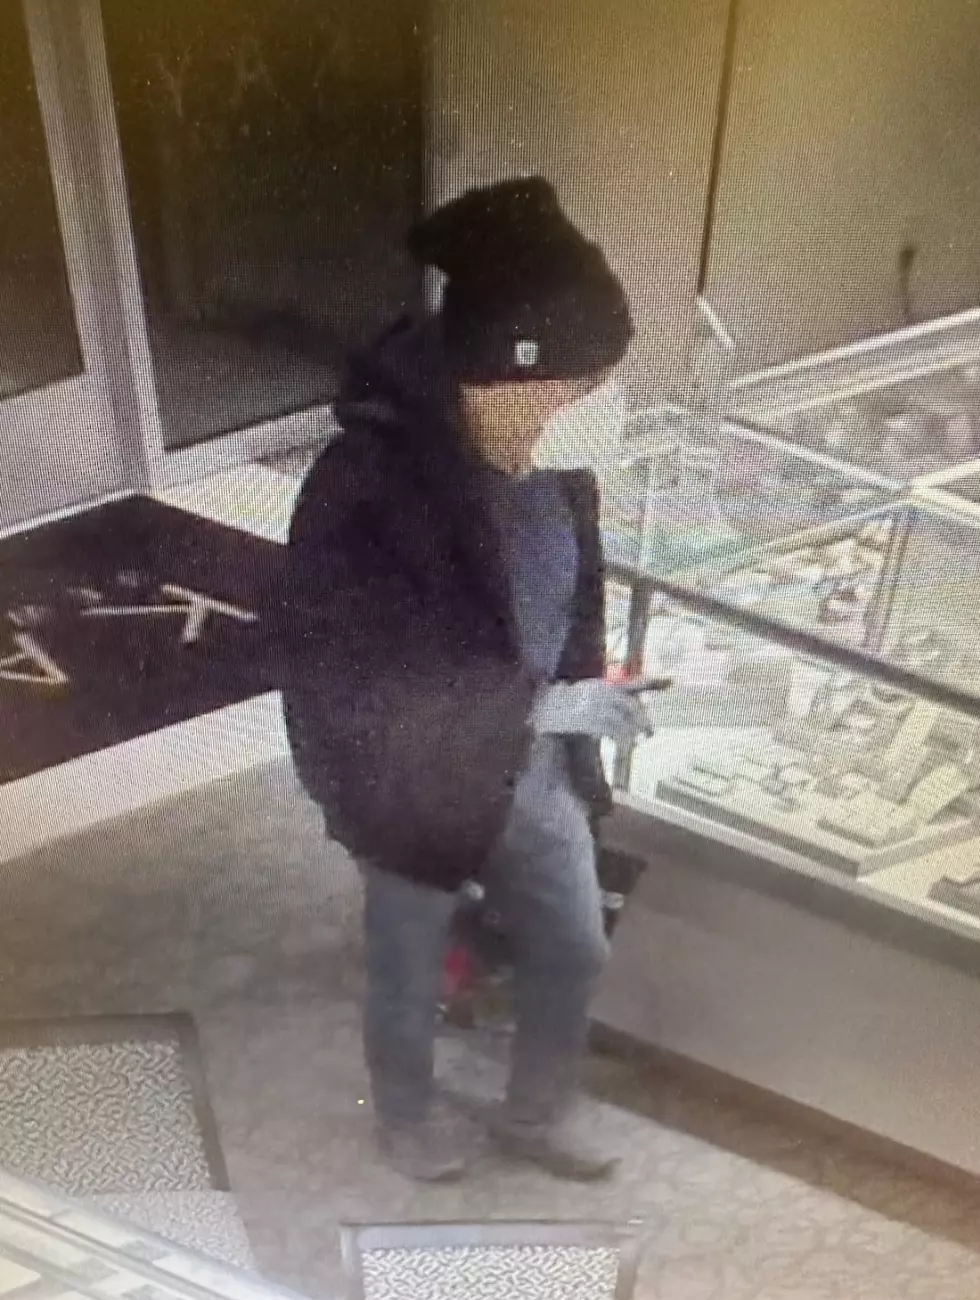 Holmdel Police searching for armed jewelry thief who took gold